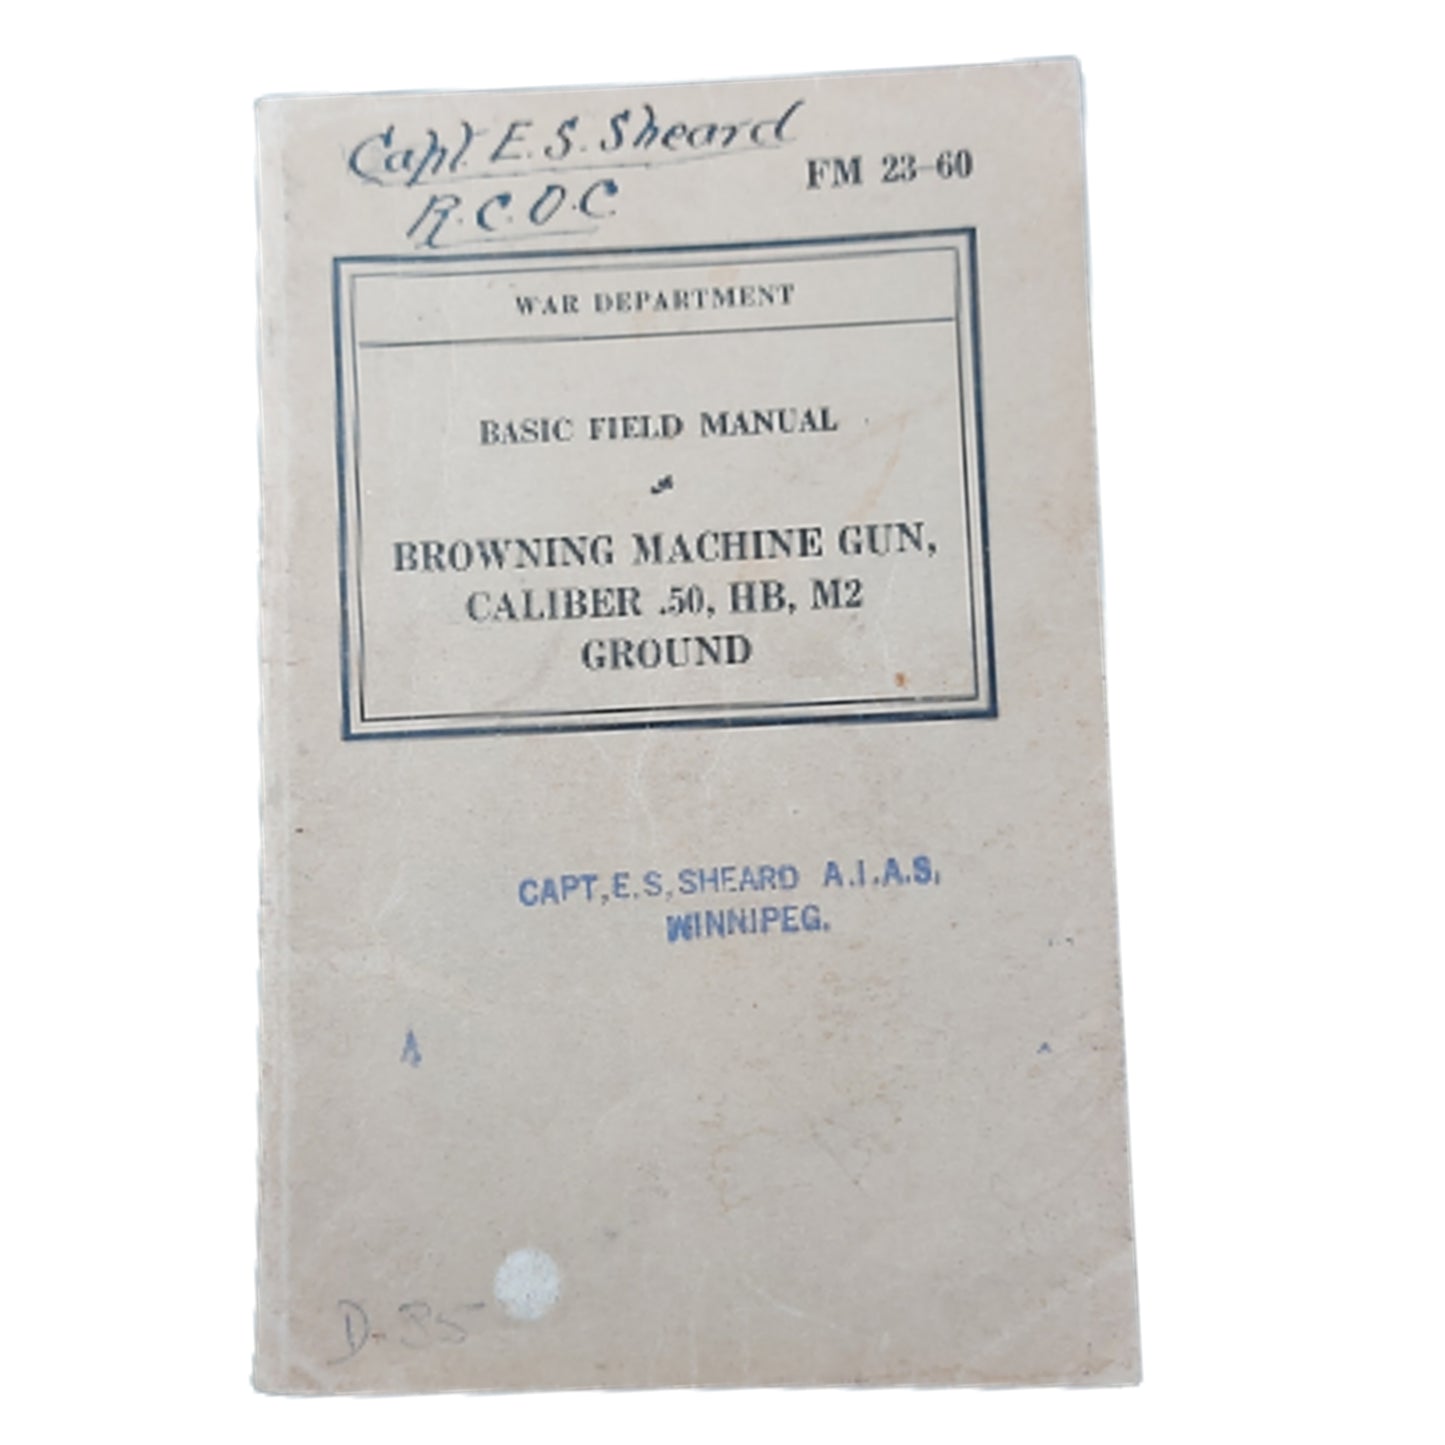 Named WW2 Manual - Browning M2 50 Ground MG- RCOC Royal Canadian Ordnance Corps